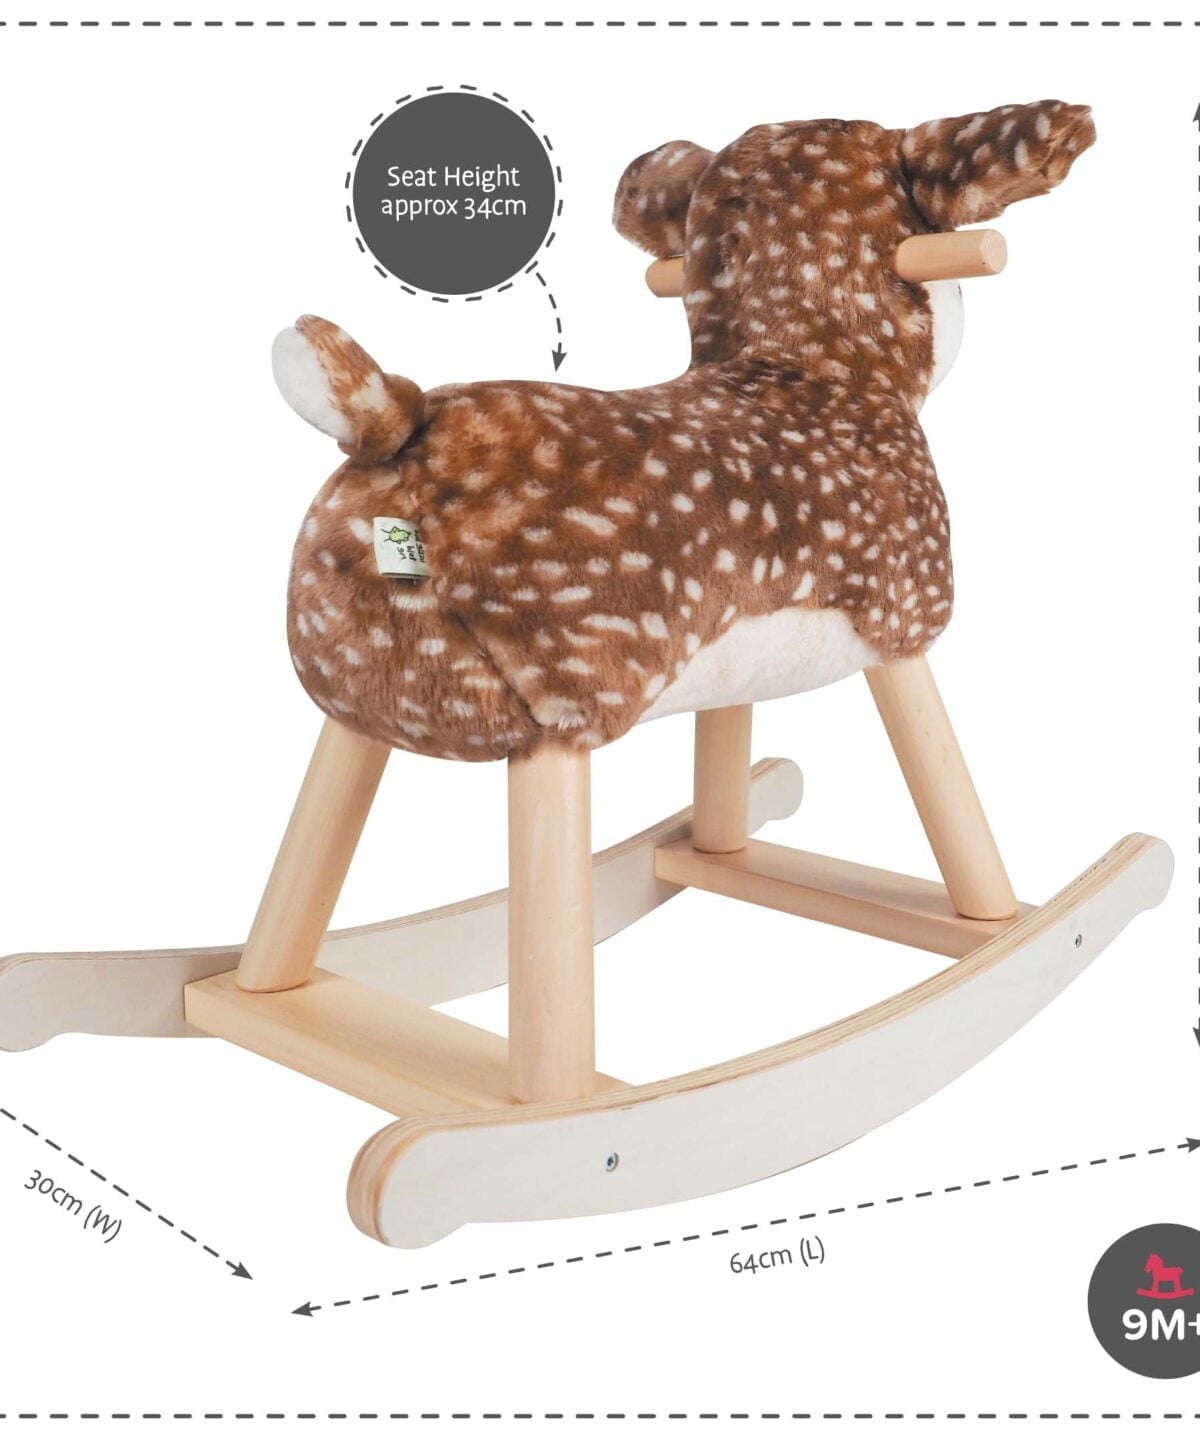 Product dimensions displayed for Willow Rocking Deer